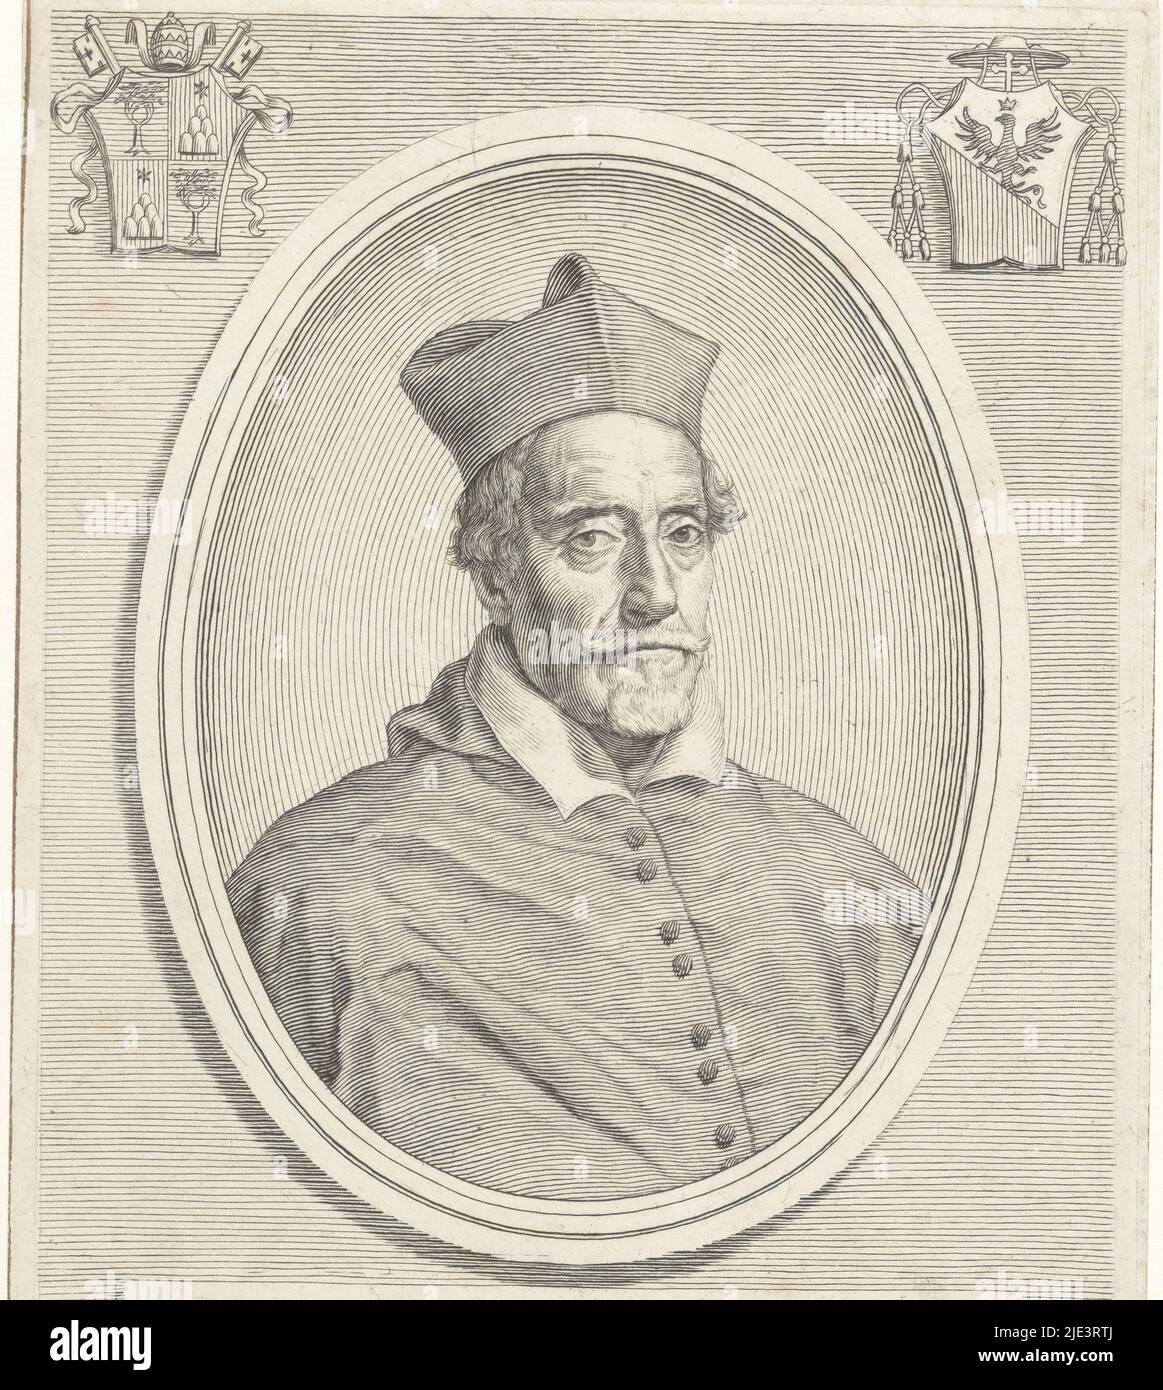 Top left and top right a coat of arms, Portrait of Cardinal Camillo Melzi Portraits of cardinals with two coats of arms  Effigies, print maker: Giuseppe Maria Testana, (mentioned on object), Giuseppe Maria Testana, (mentioned on object), after: Giovanni Maria Morandi, (mentioned on object), print maker: Italy, Italy, after: Italy, publisher: Rome, Vaticaanstad, 1658 - 1679, paper, engraving, h 194 mm - w 142 mm Stock Photo